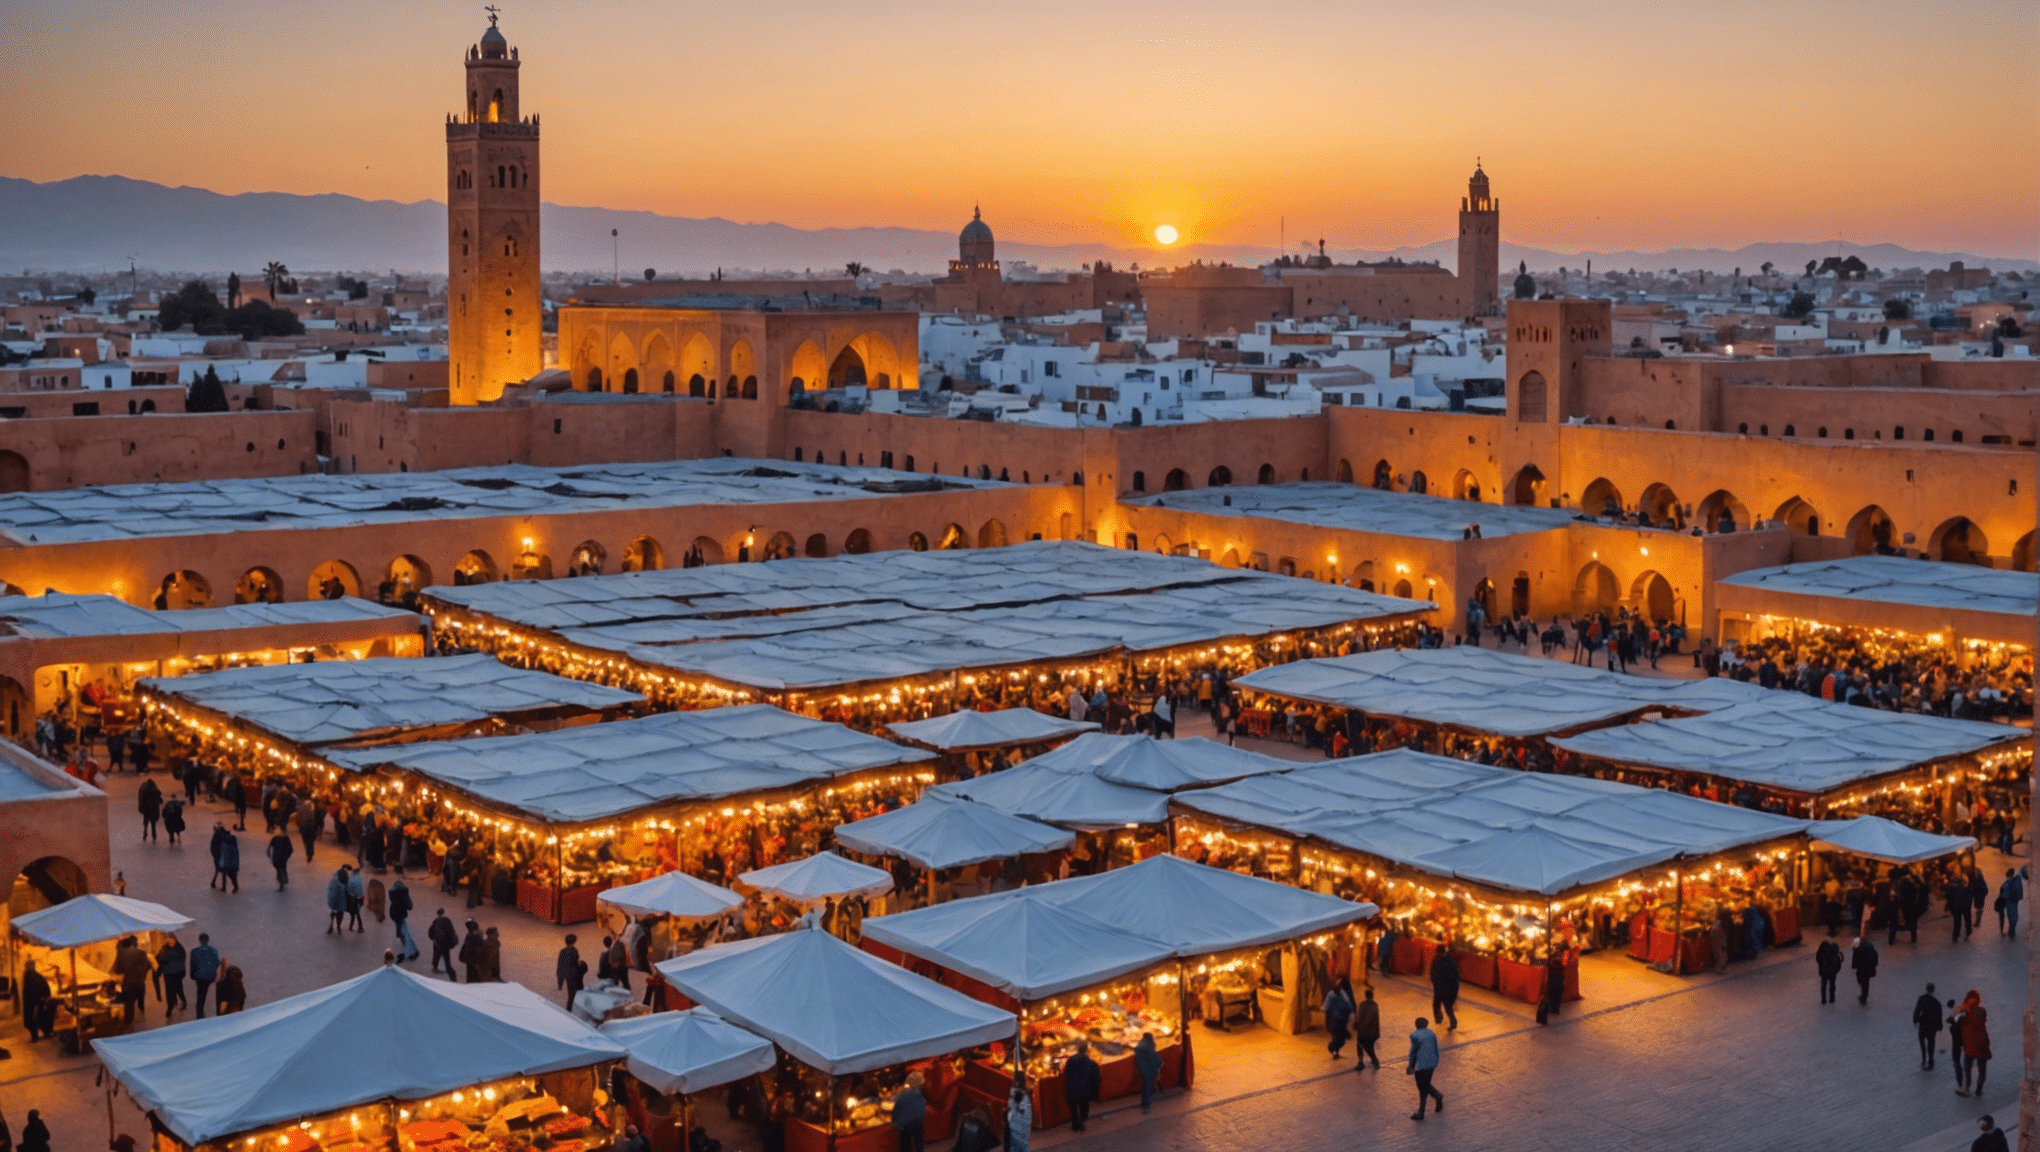 discover the magic of morocco in december and decide if it's a must-do for your next adventure. delve into the cultural riches, vibrant markets, and unique experiences of this north african destination during the festive season.